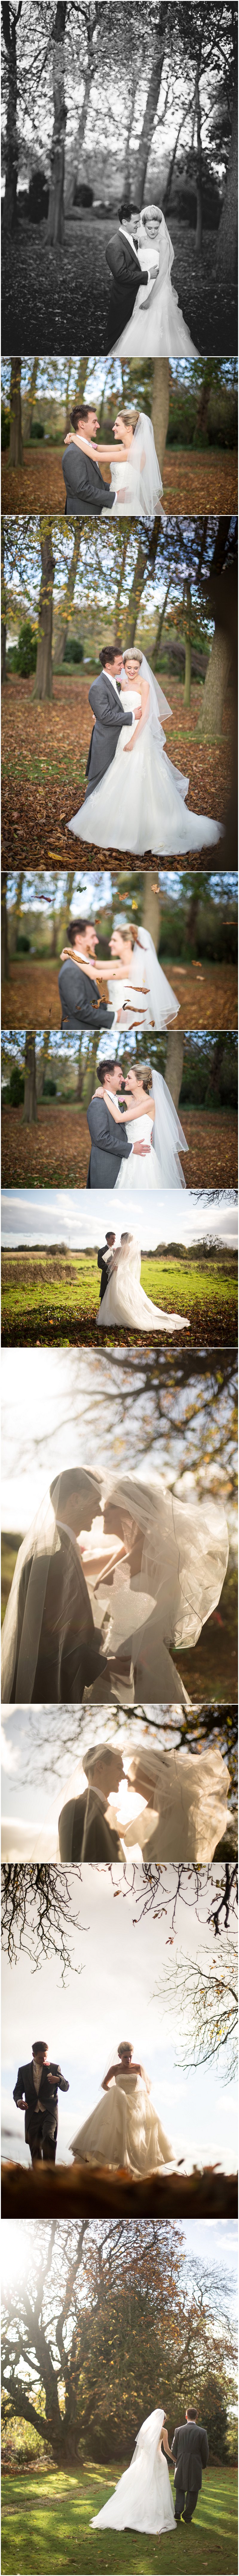 Beautiful Bride and groom in grounds of Crabwall Manor